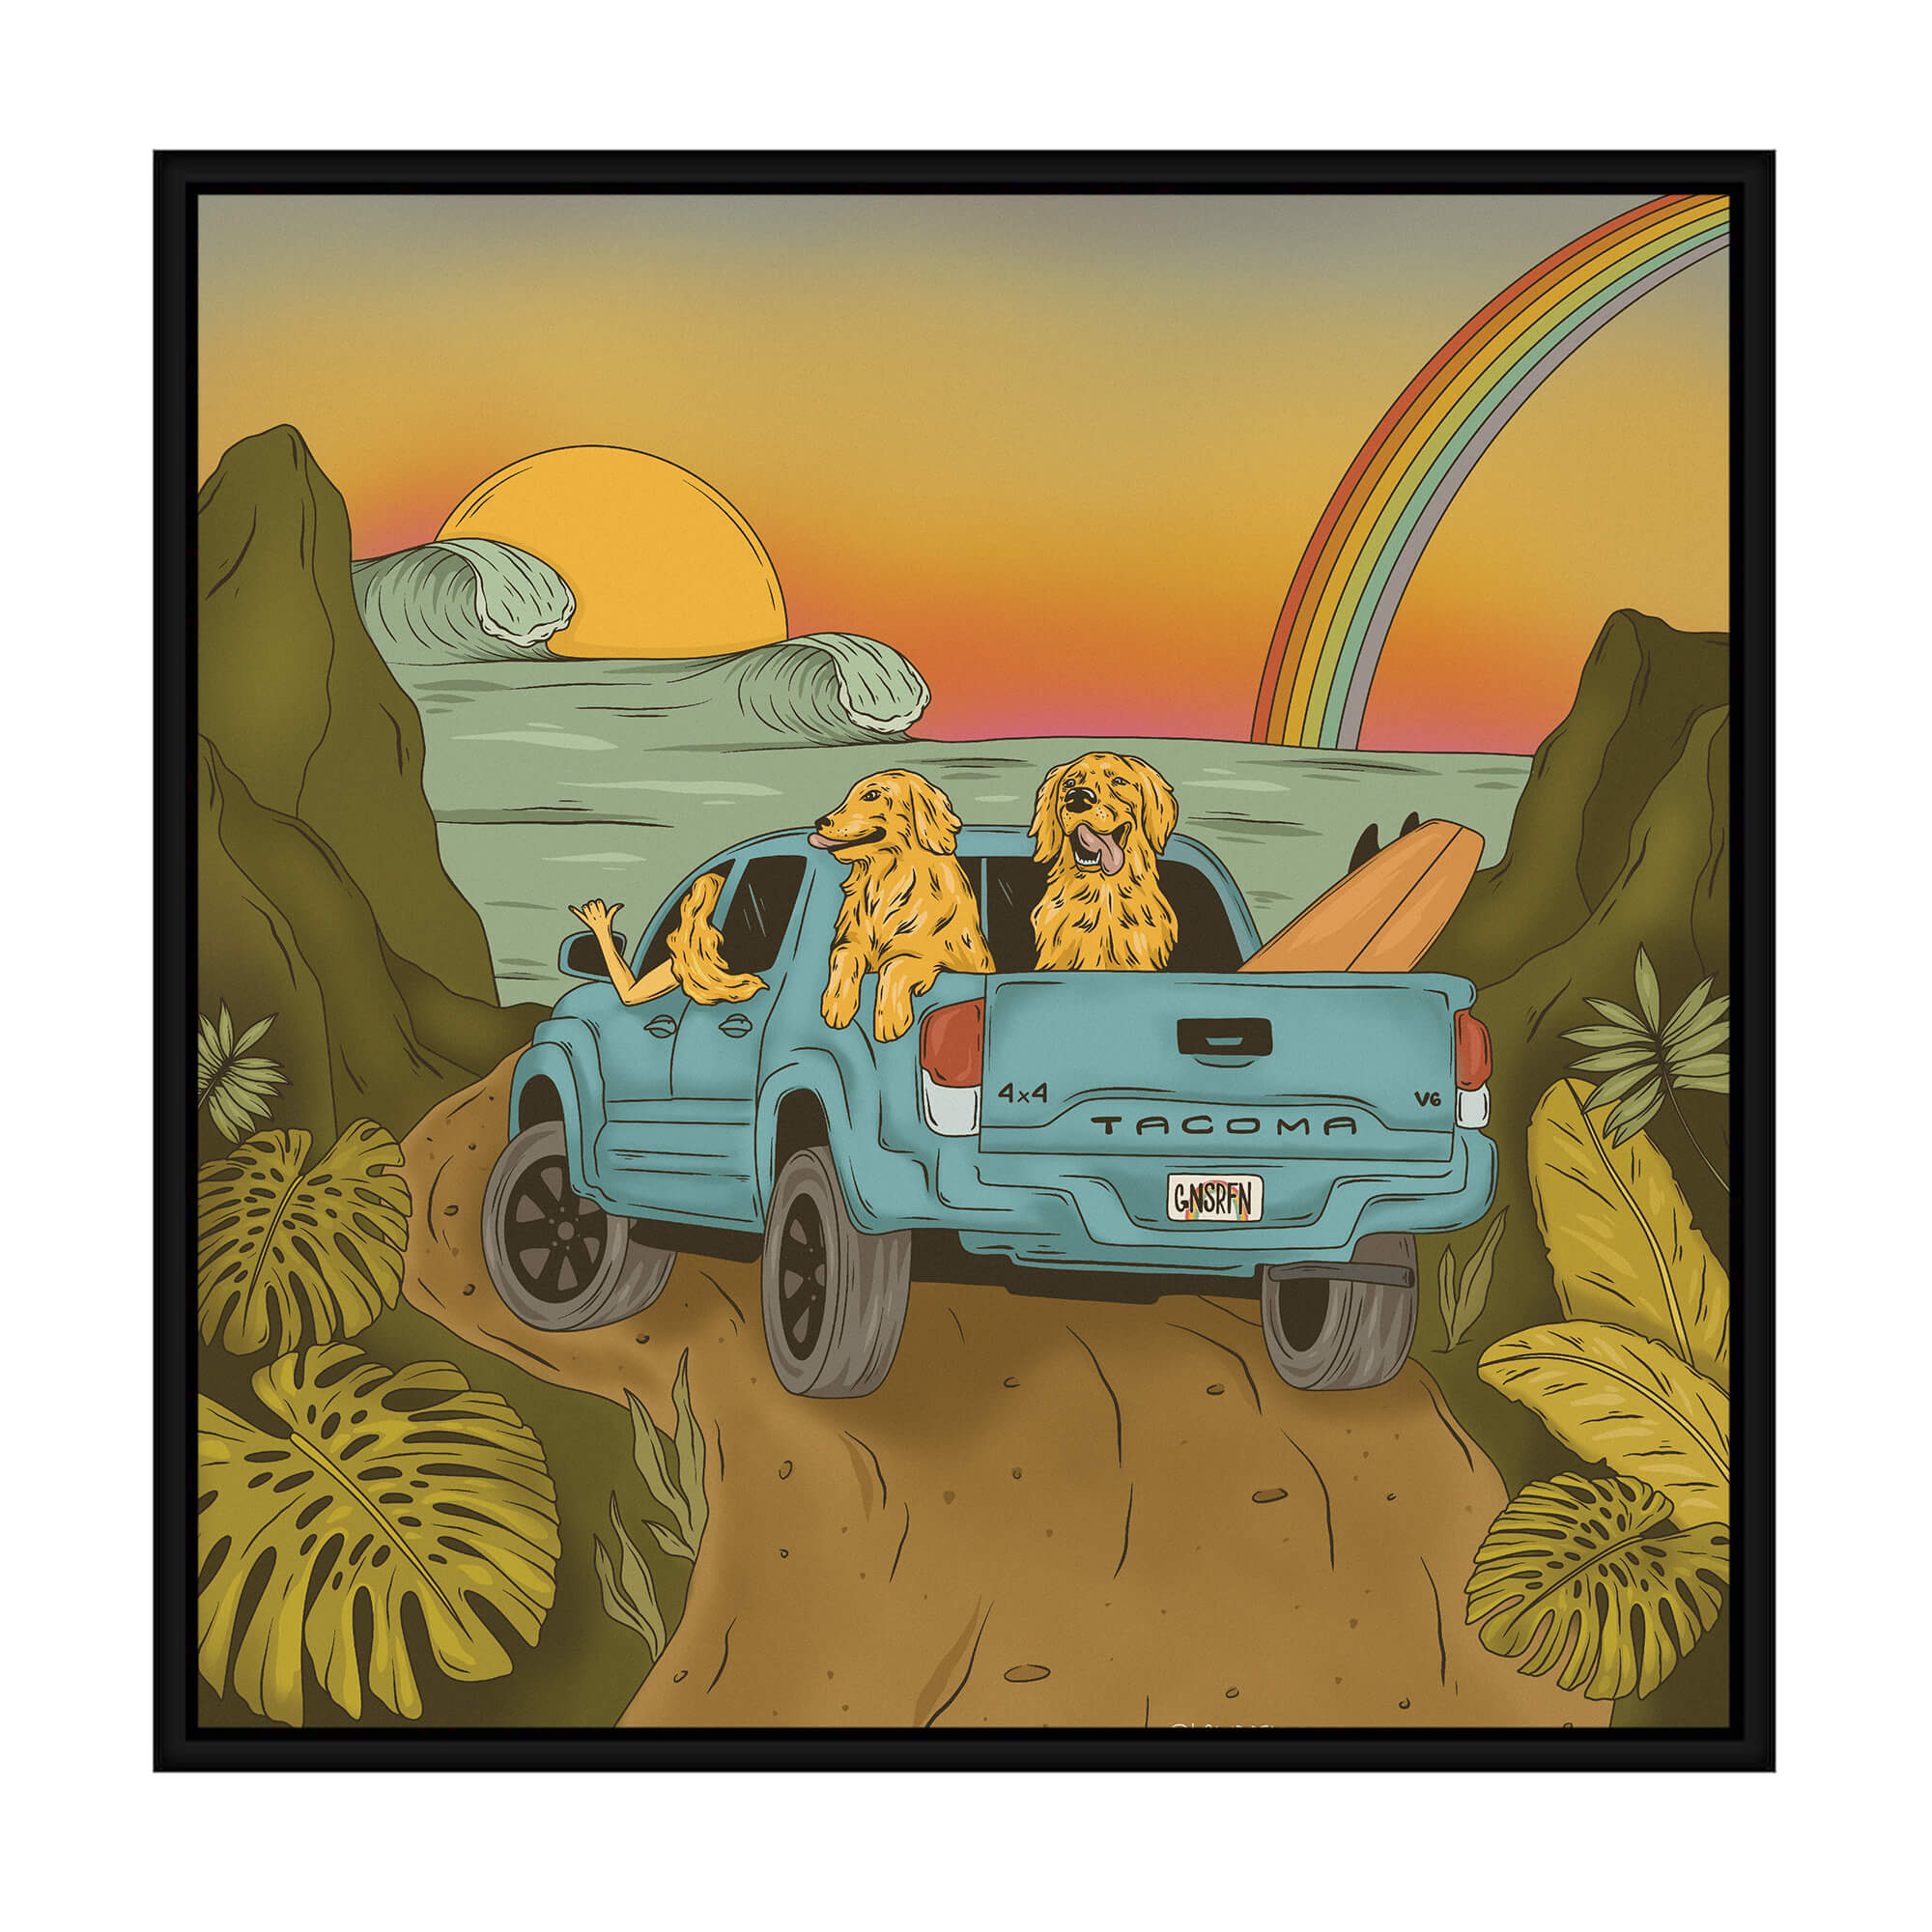 Canvas art print featuring a woman surfer driving her dogs to the beach by Hawaii artist Laihha Organna